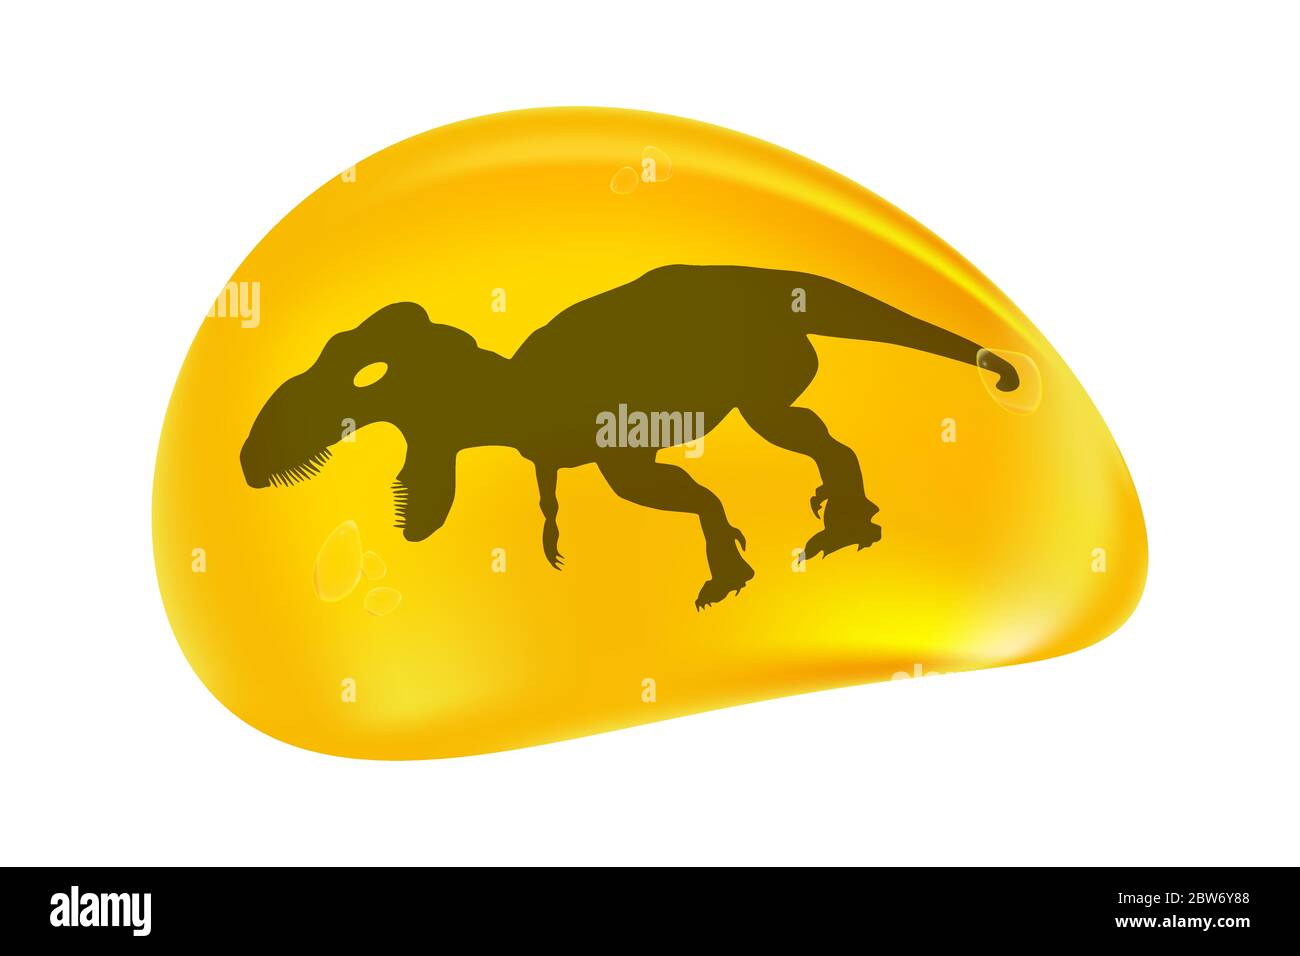 Dinosaur in a drop of amber isolated on white background. Fossilised tree resin.Ancient amber midge inclusion.Piece of amber with a dino inside.Vecto Stock Vector